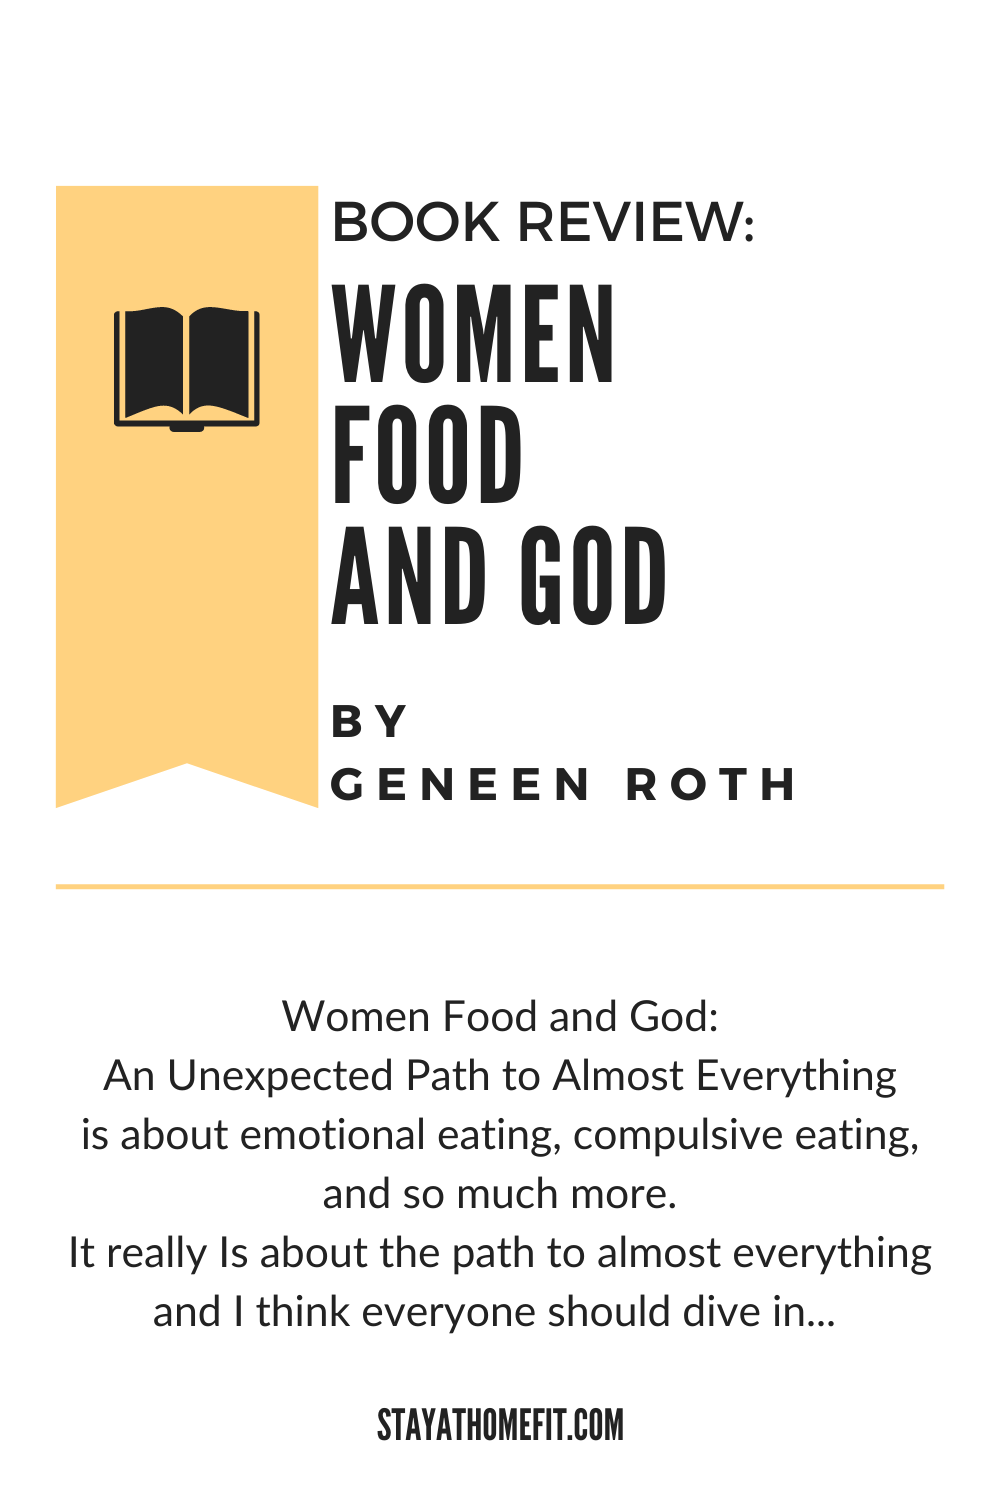 Book Review: Women Food and God by Geneen Roth